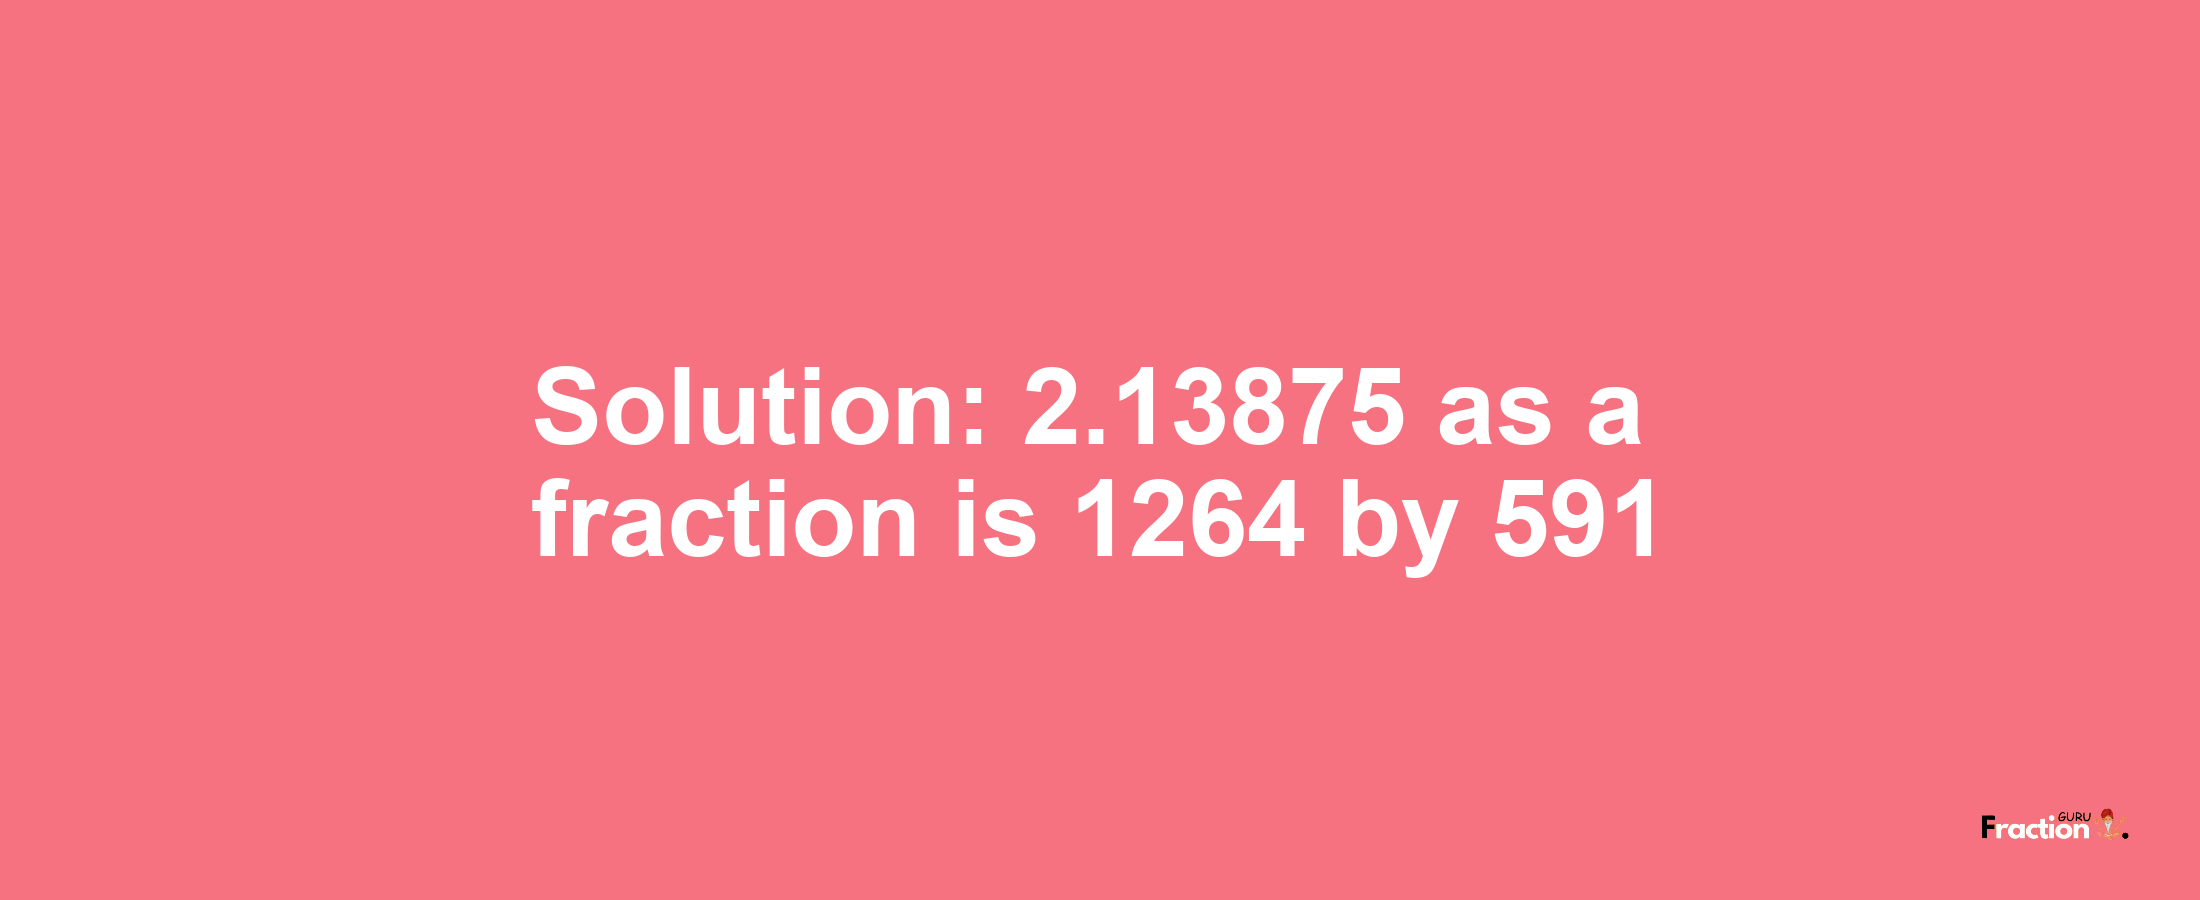 Solution:2.13875 as a fraction is 1264/591